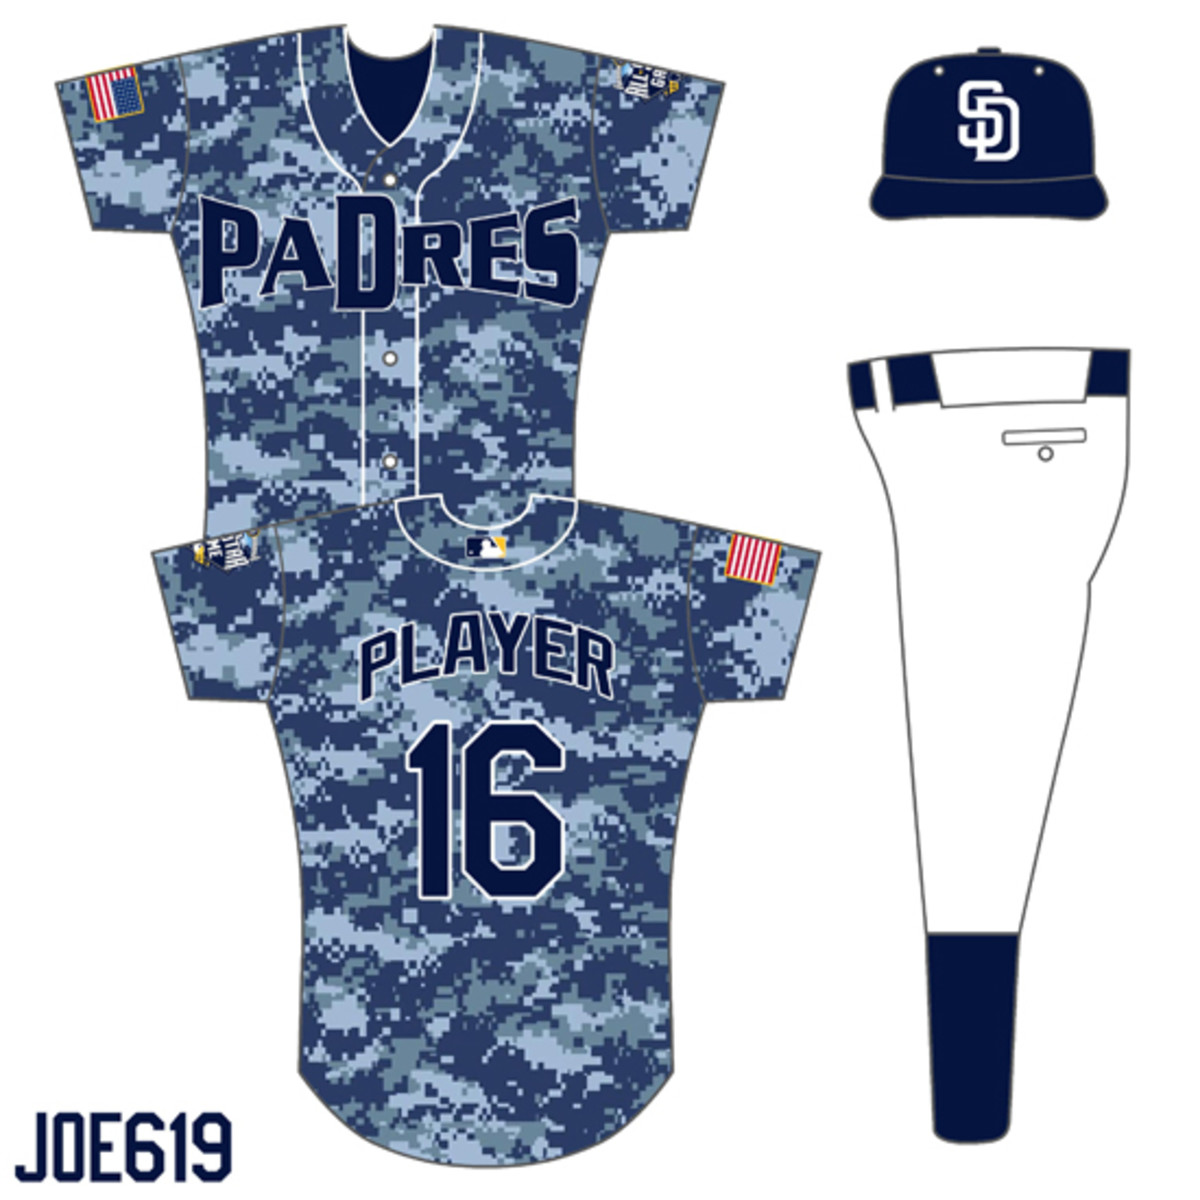 padres jersey navy